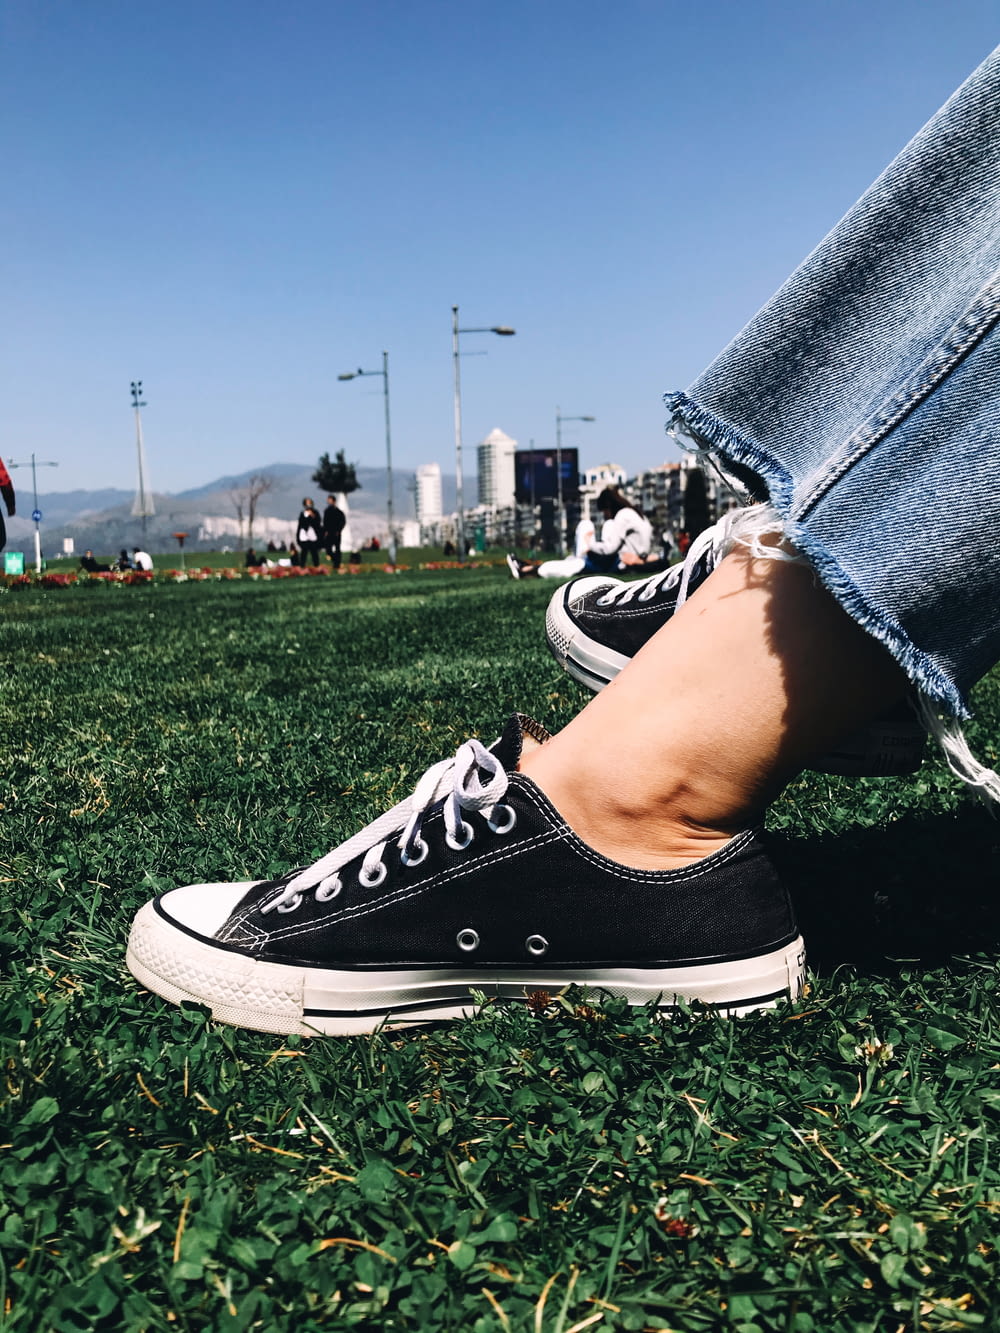 person in black and white converse all star high top sneakers